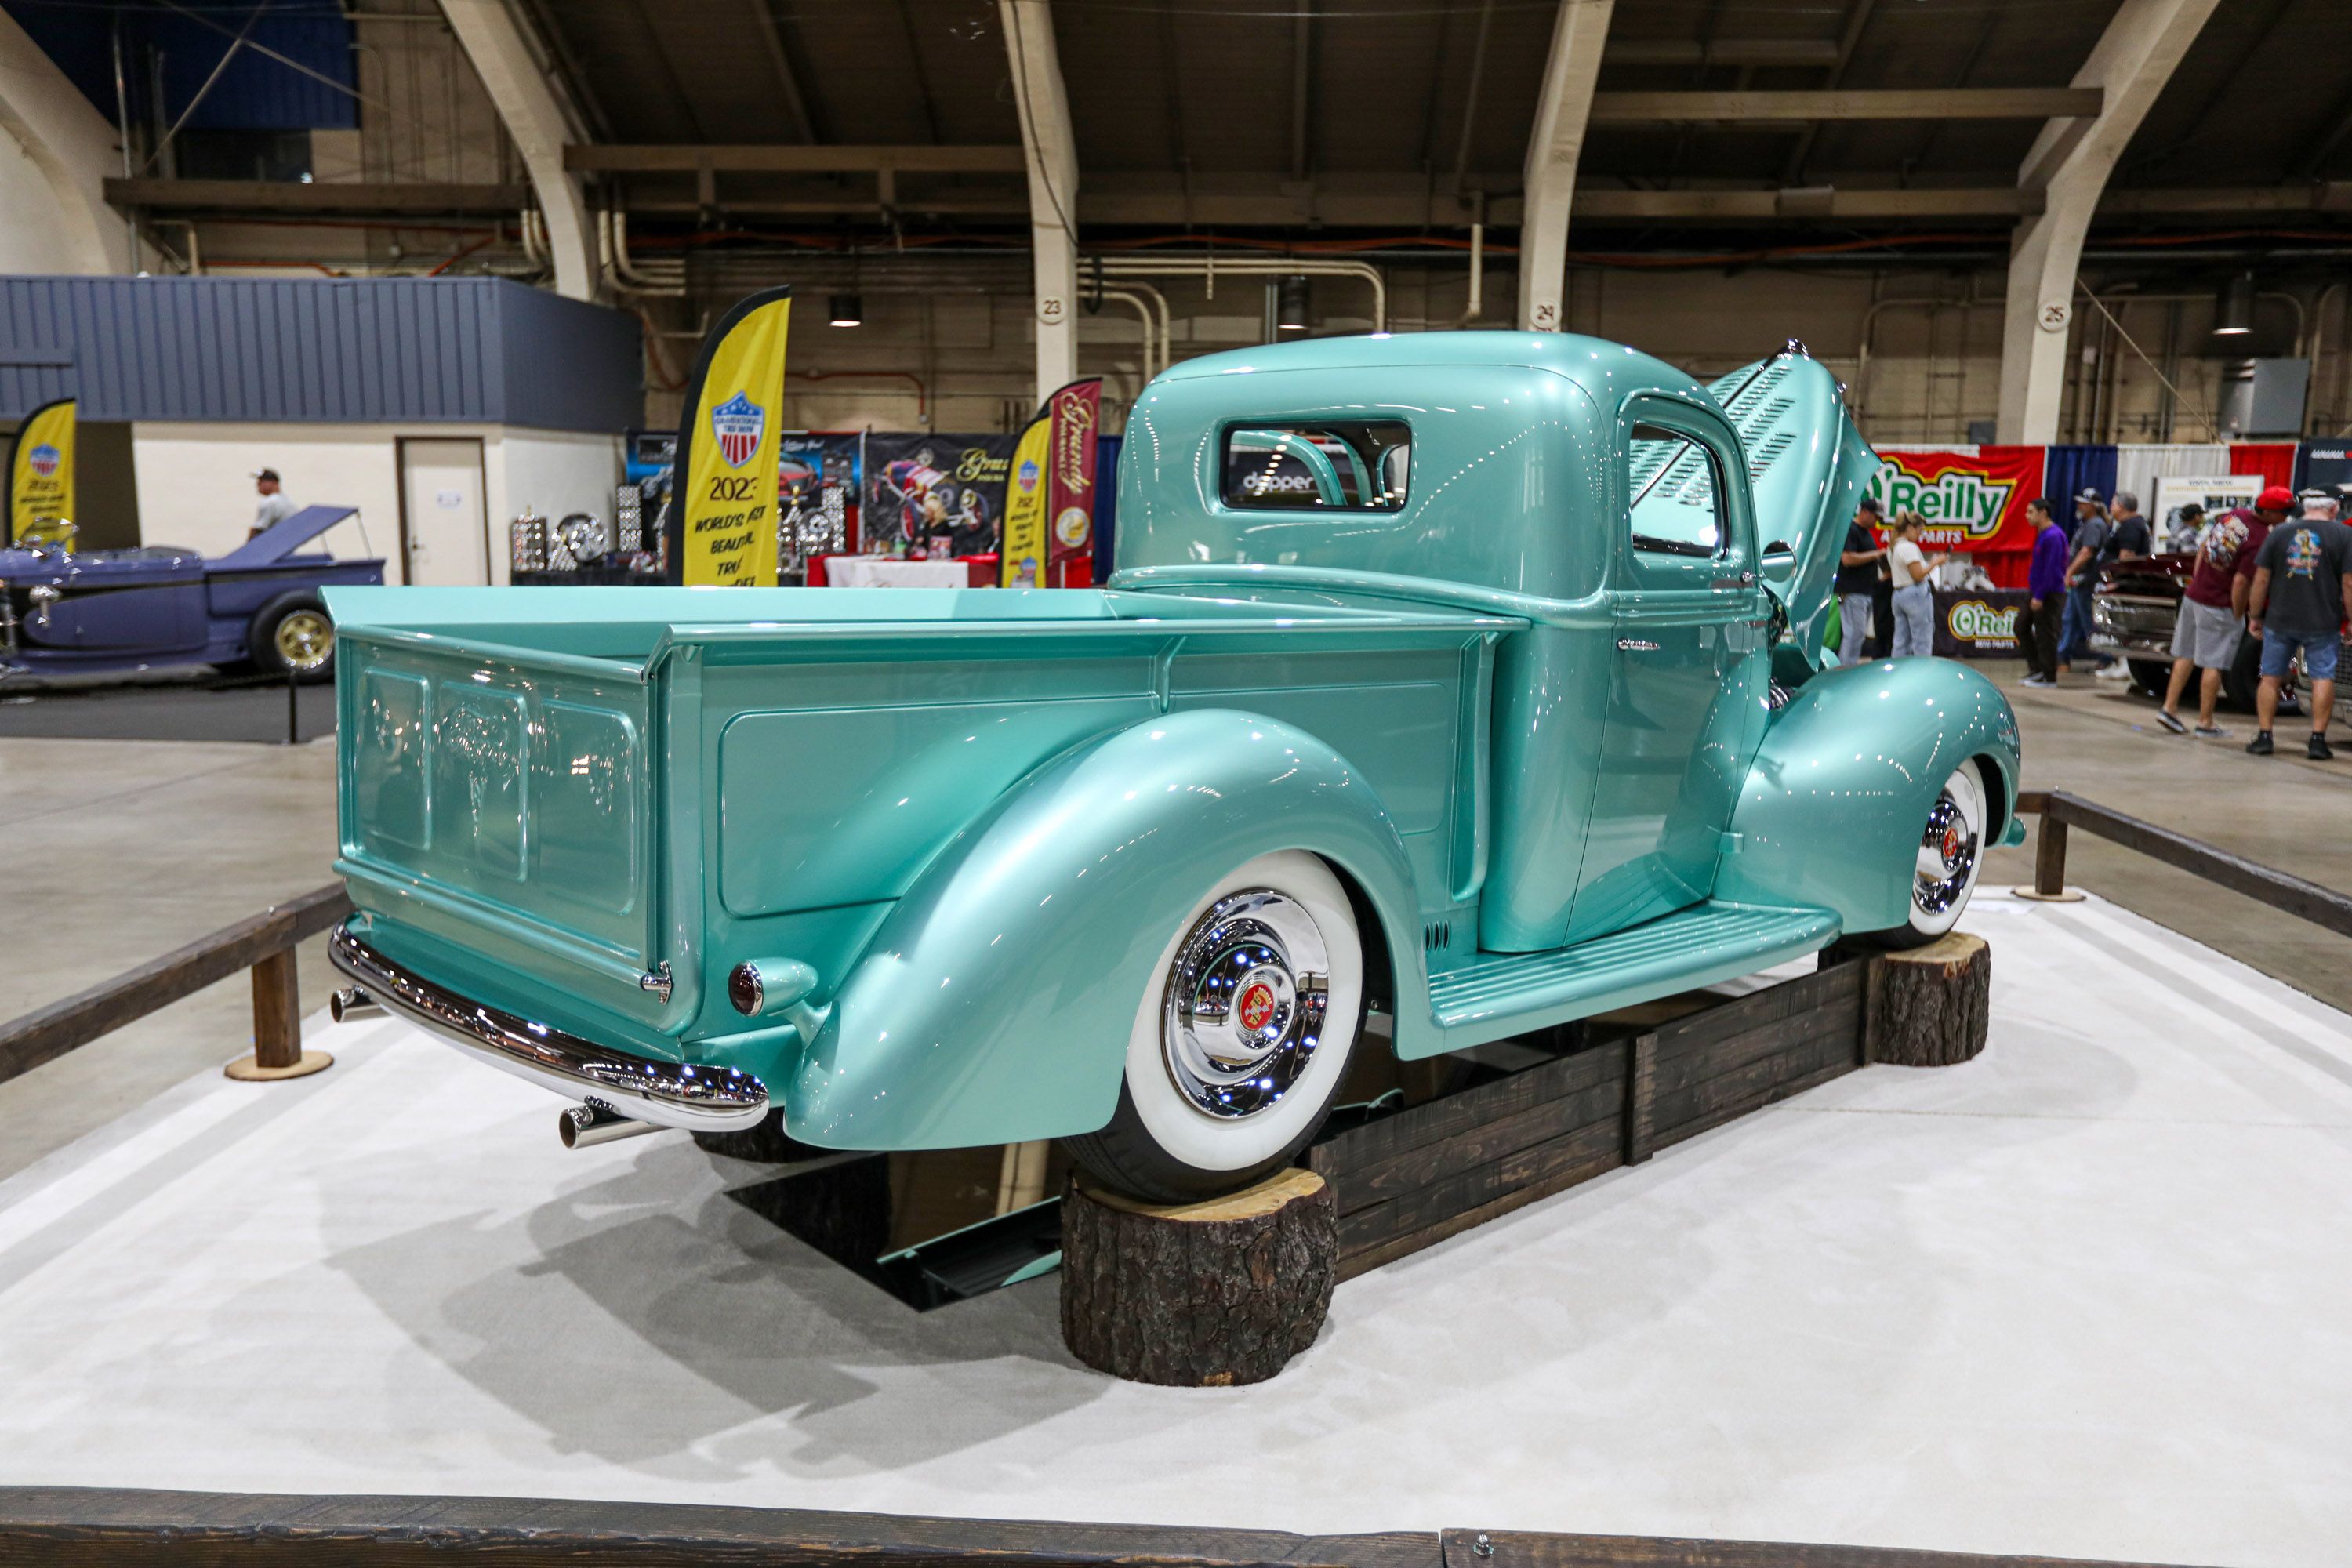 Stunningly Hanging in Lovely Blue: The 1940 Ford Claims Title of World’s Most Beautiful Truck